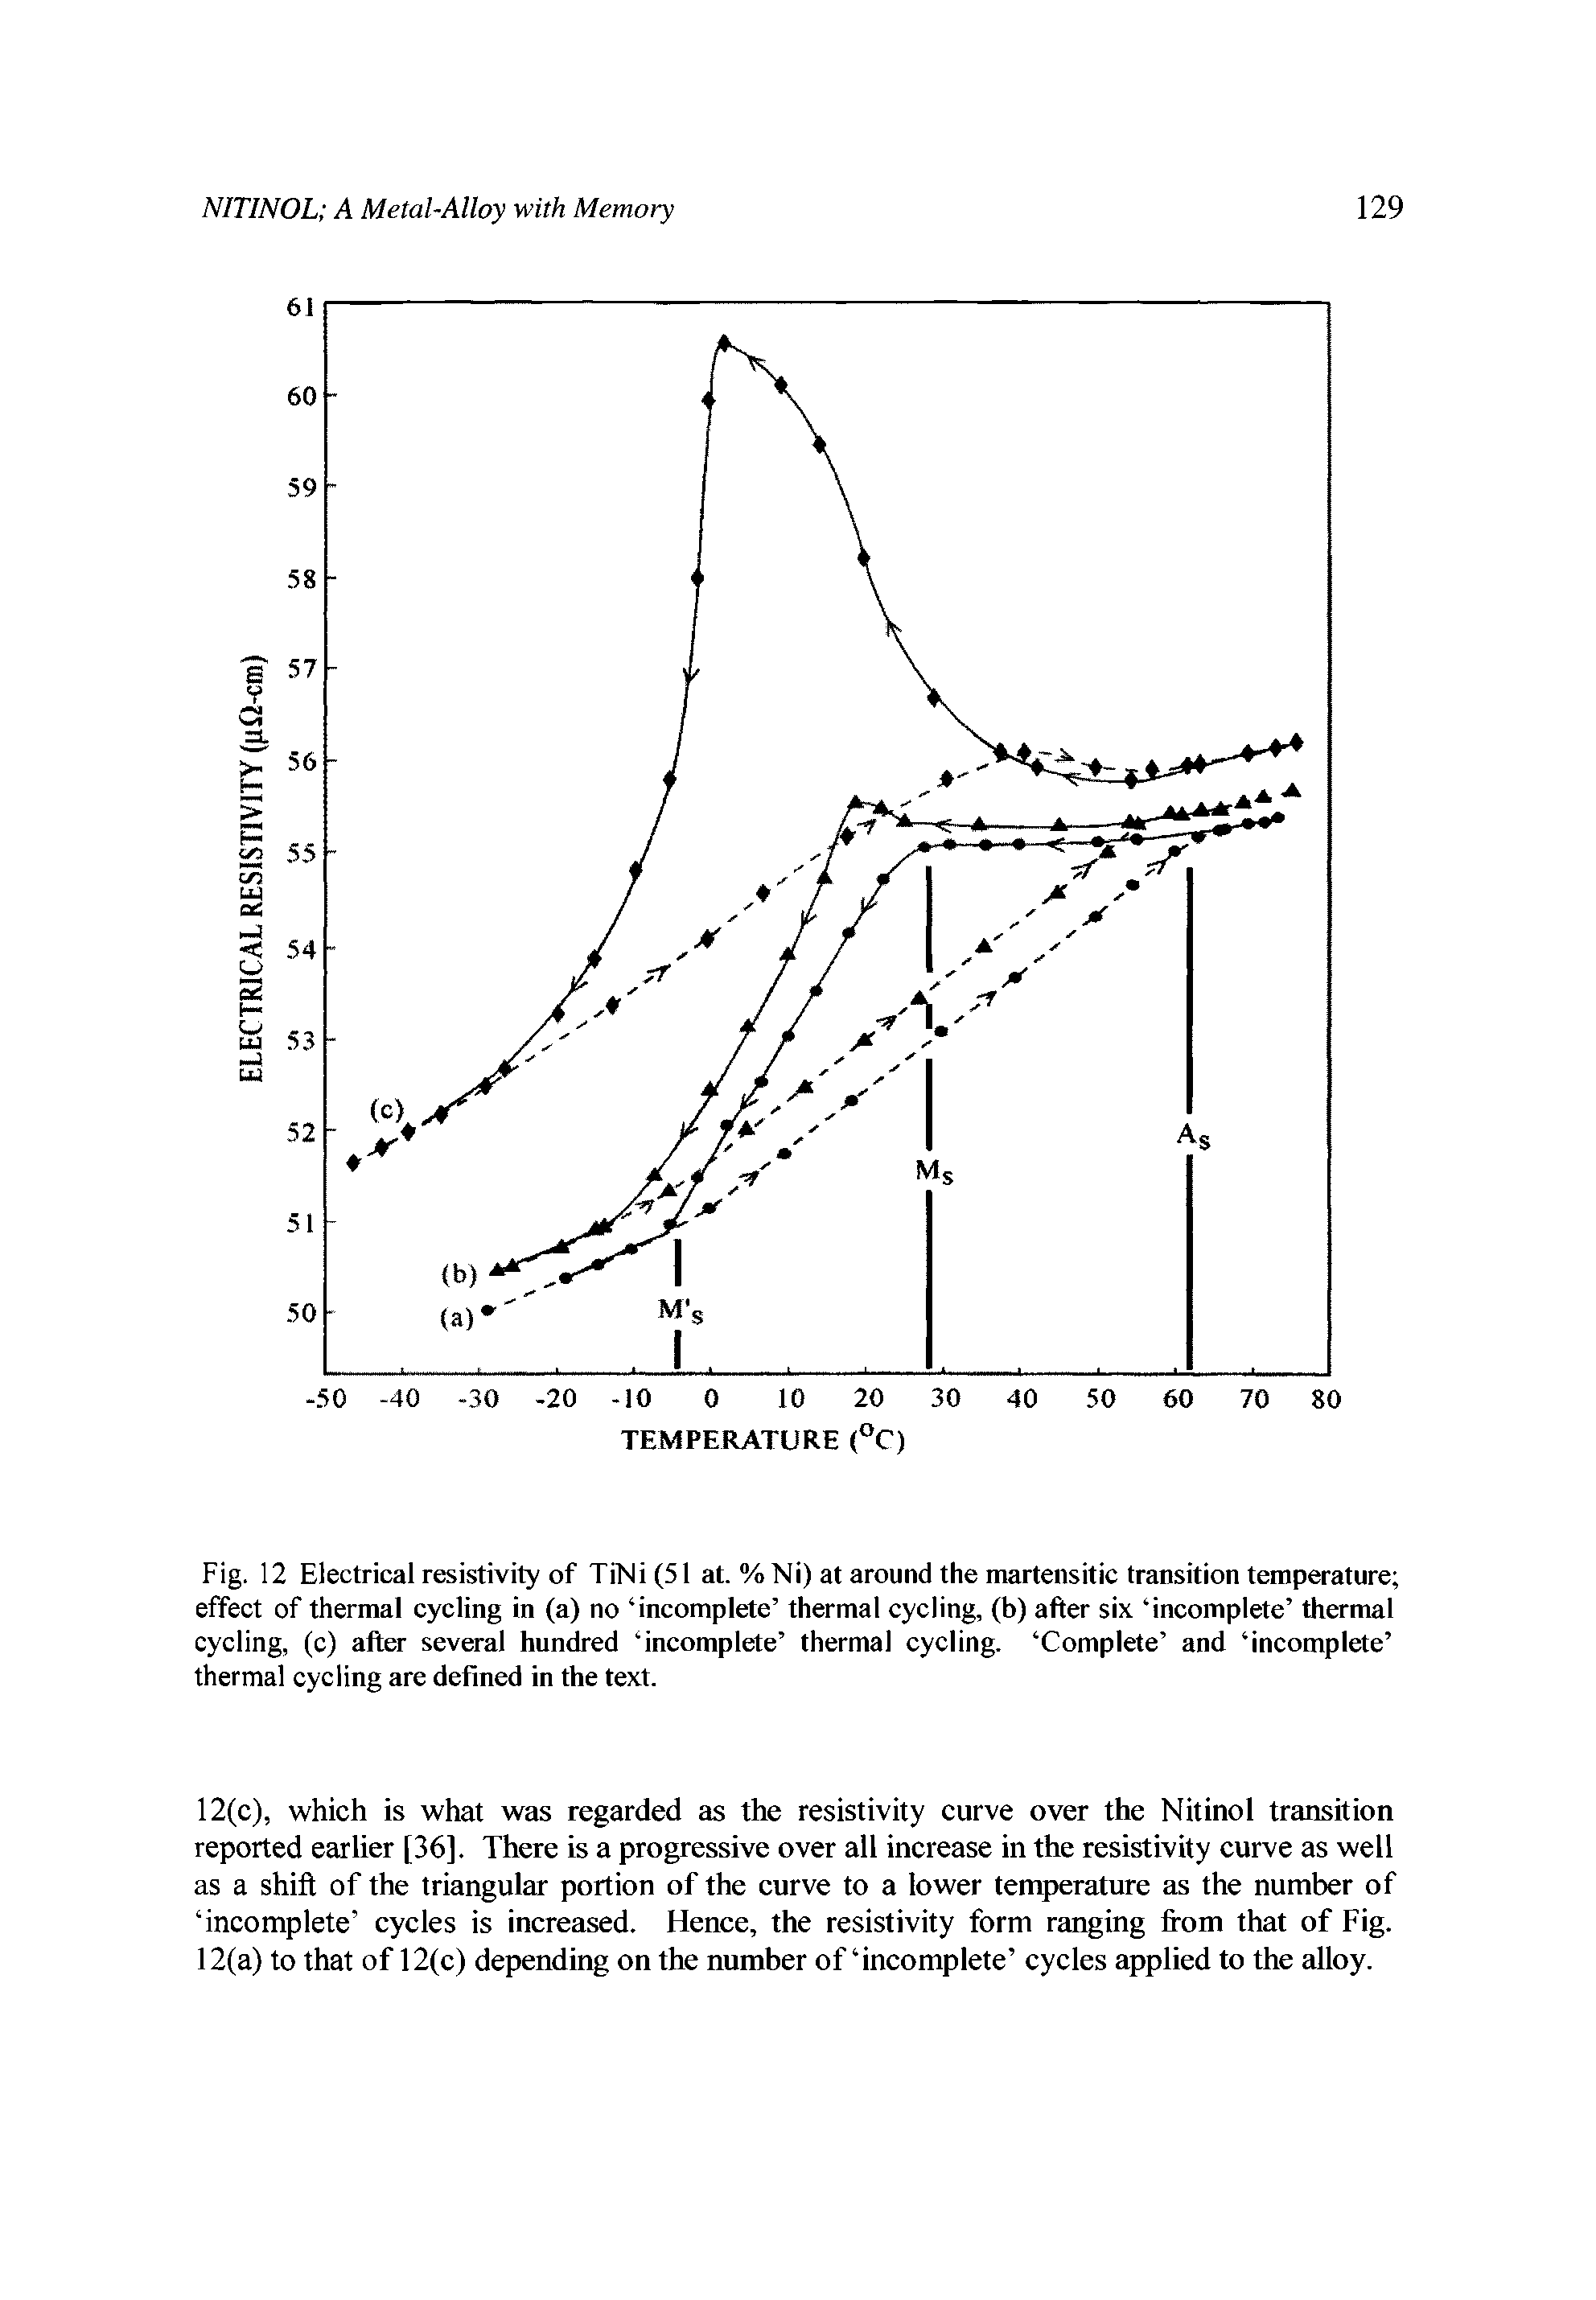 Fig. 12 Electrical resistivity of TiNi(51 at. %Ni) at around the martensitic transition temperature effect of thermal cycling in (a) no incomplete thermal cycling, (b) after six incomplete thermal cycling, (c) after several hundred incomplete thermal cycling. Complete and incomplete thermal cycling are defined in the text.